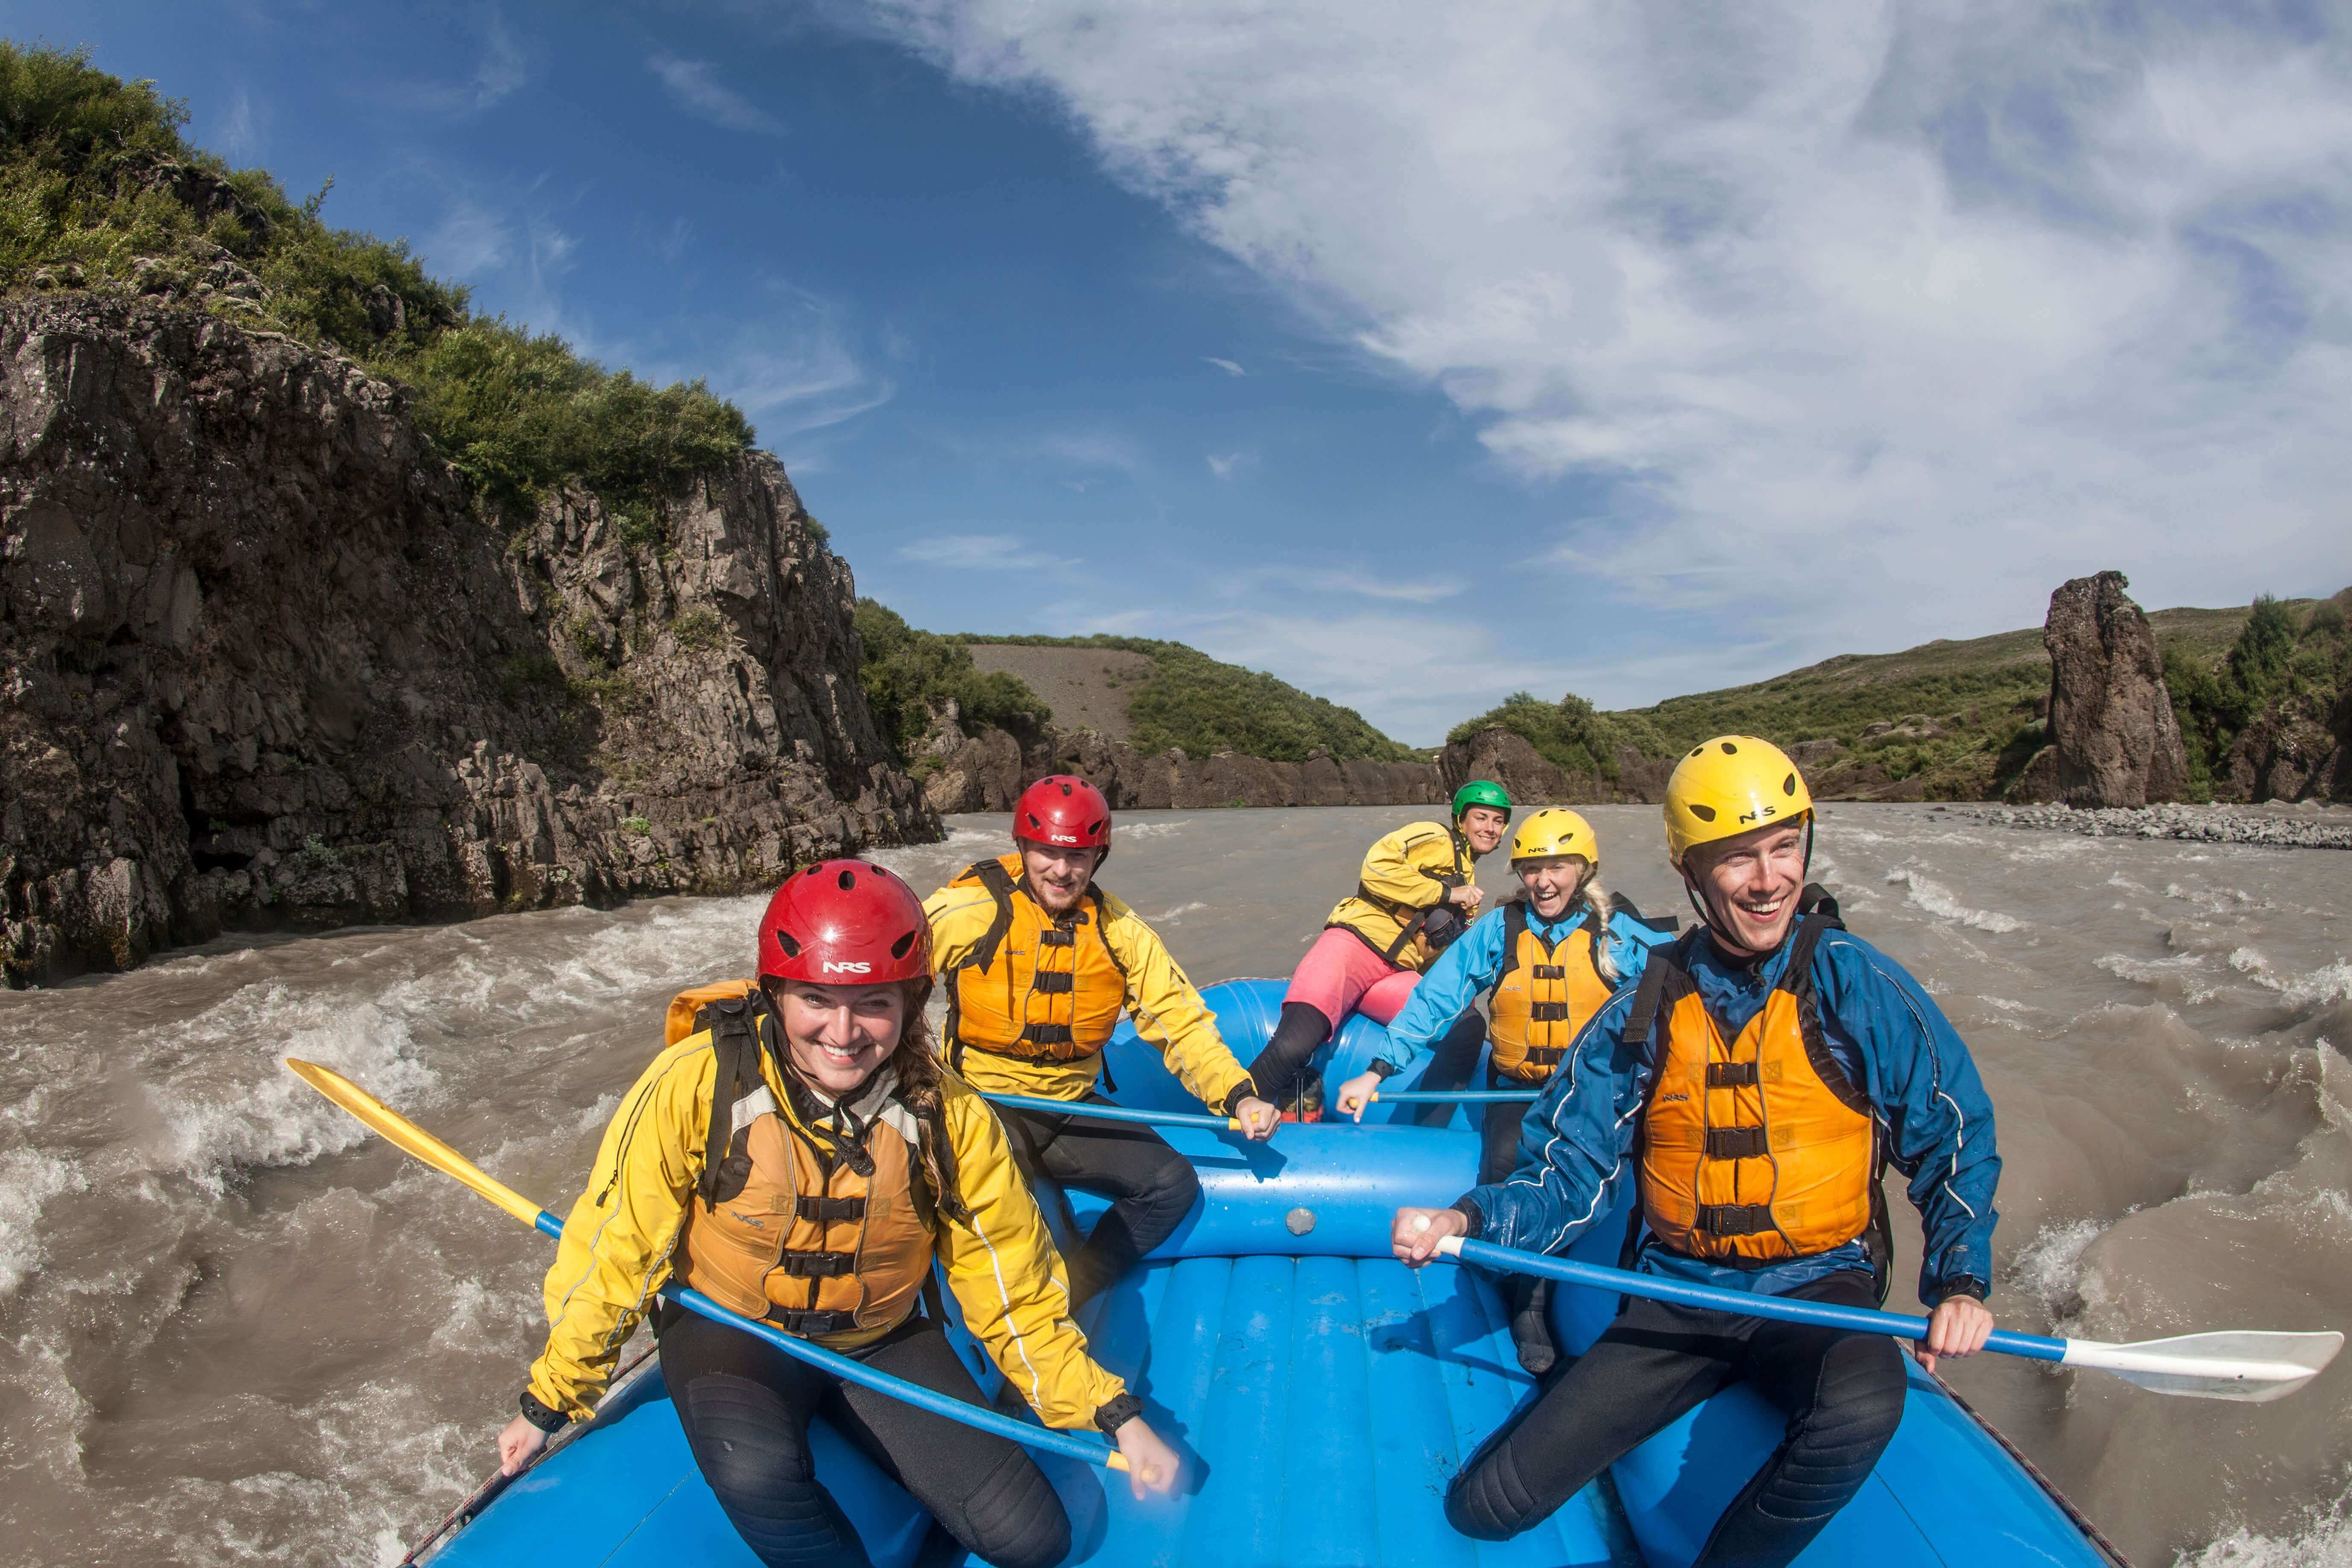 Rafting in the Golden Circle, Gullfoss Canyon